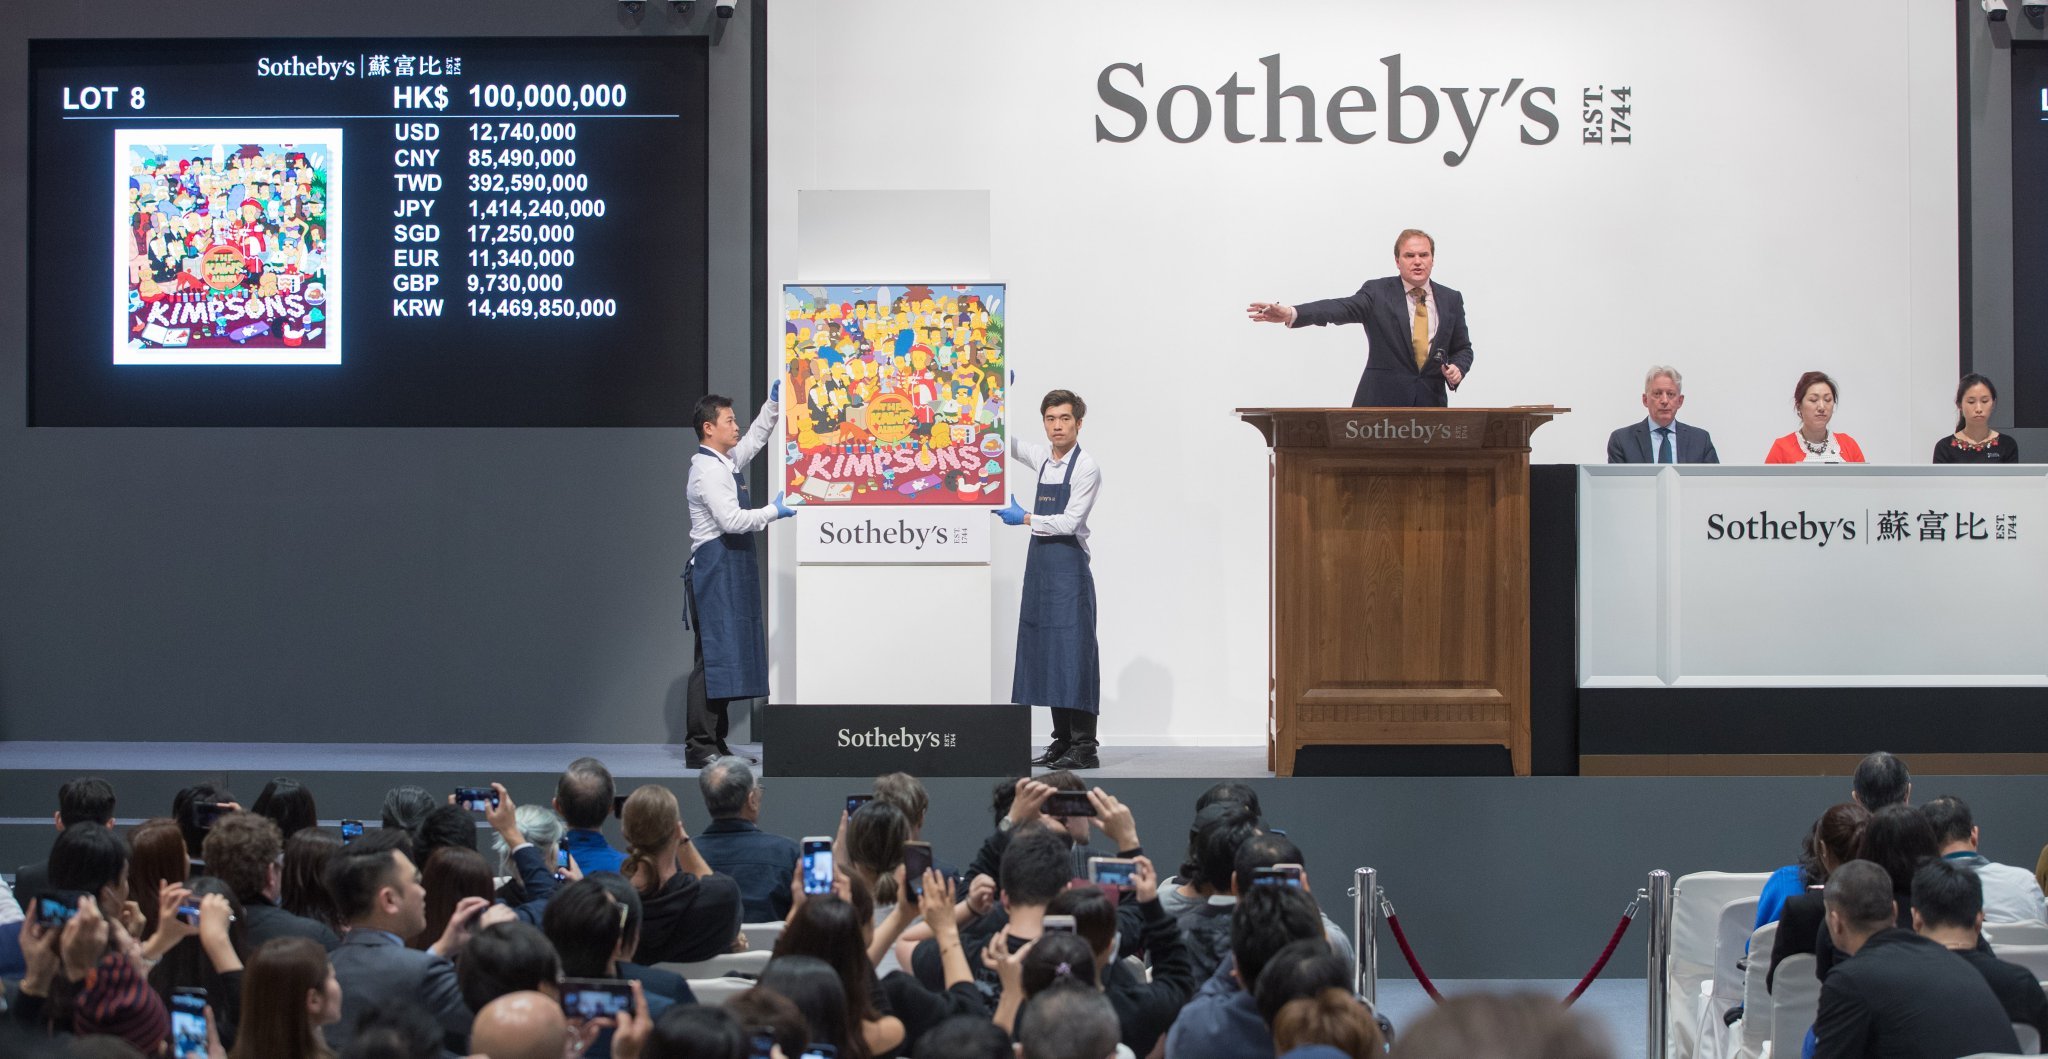 Sotheby’s Posts a Widened Loss in the First Quarter of 2019 Amid a Dip